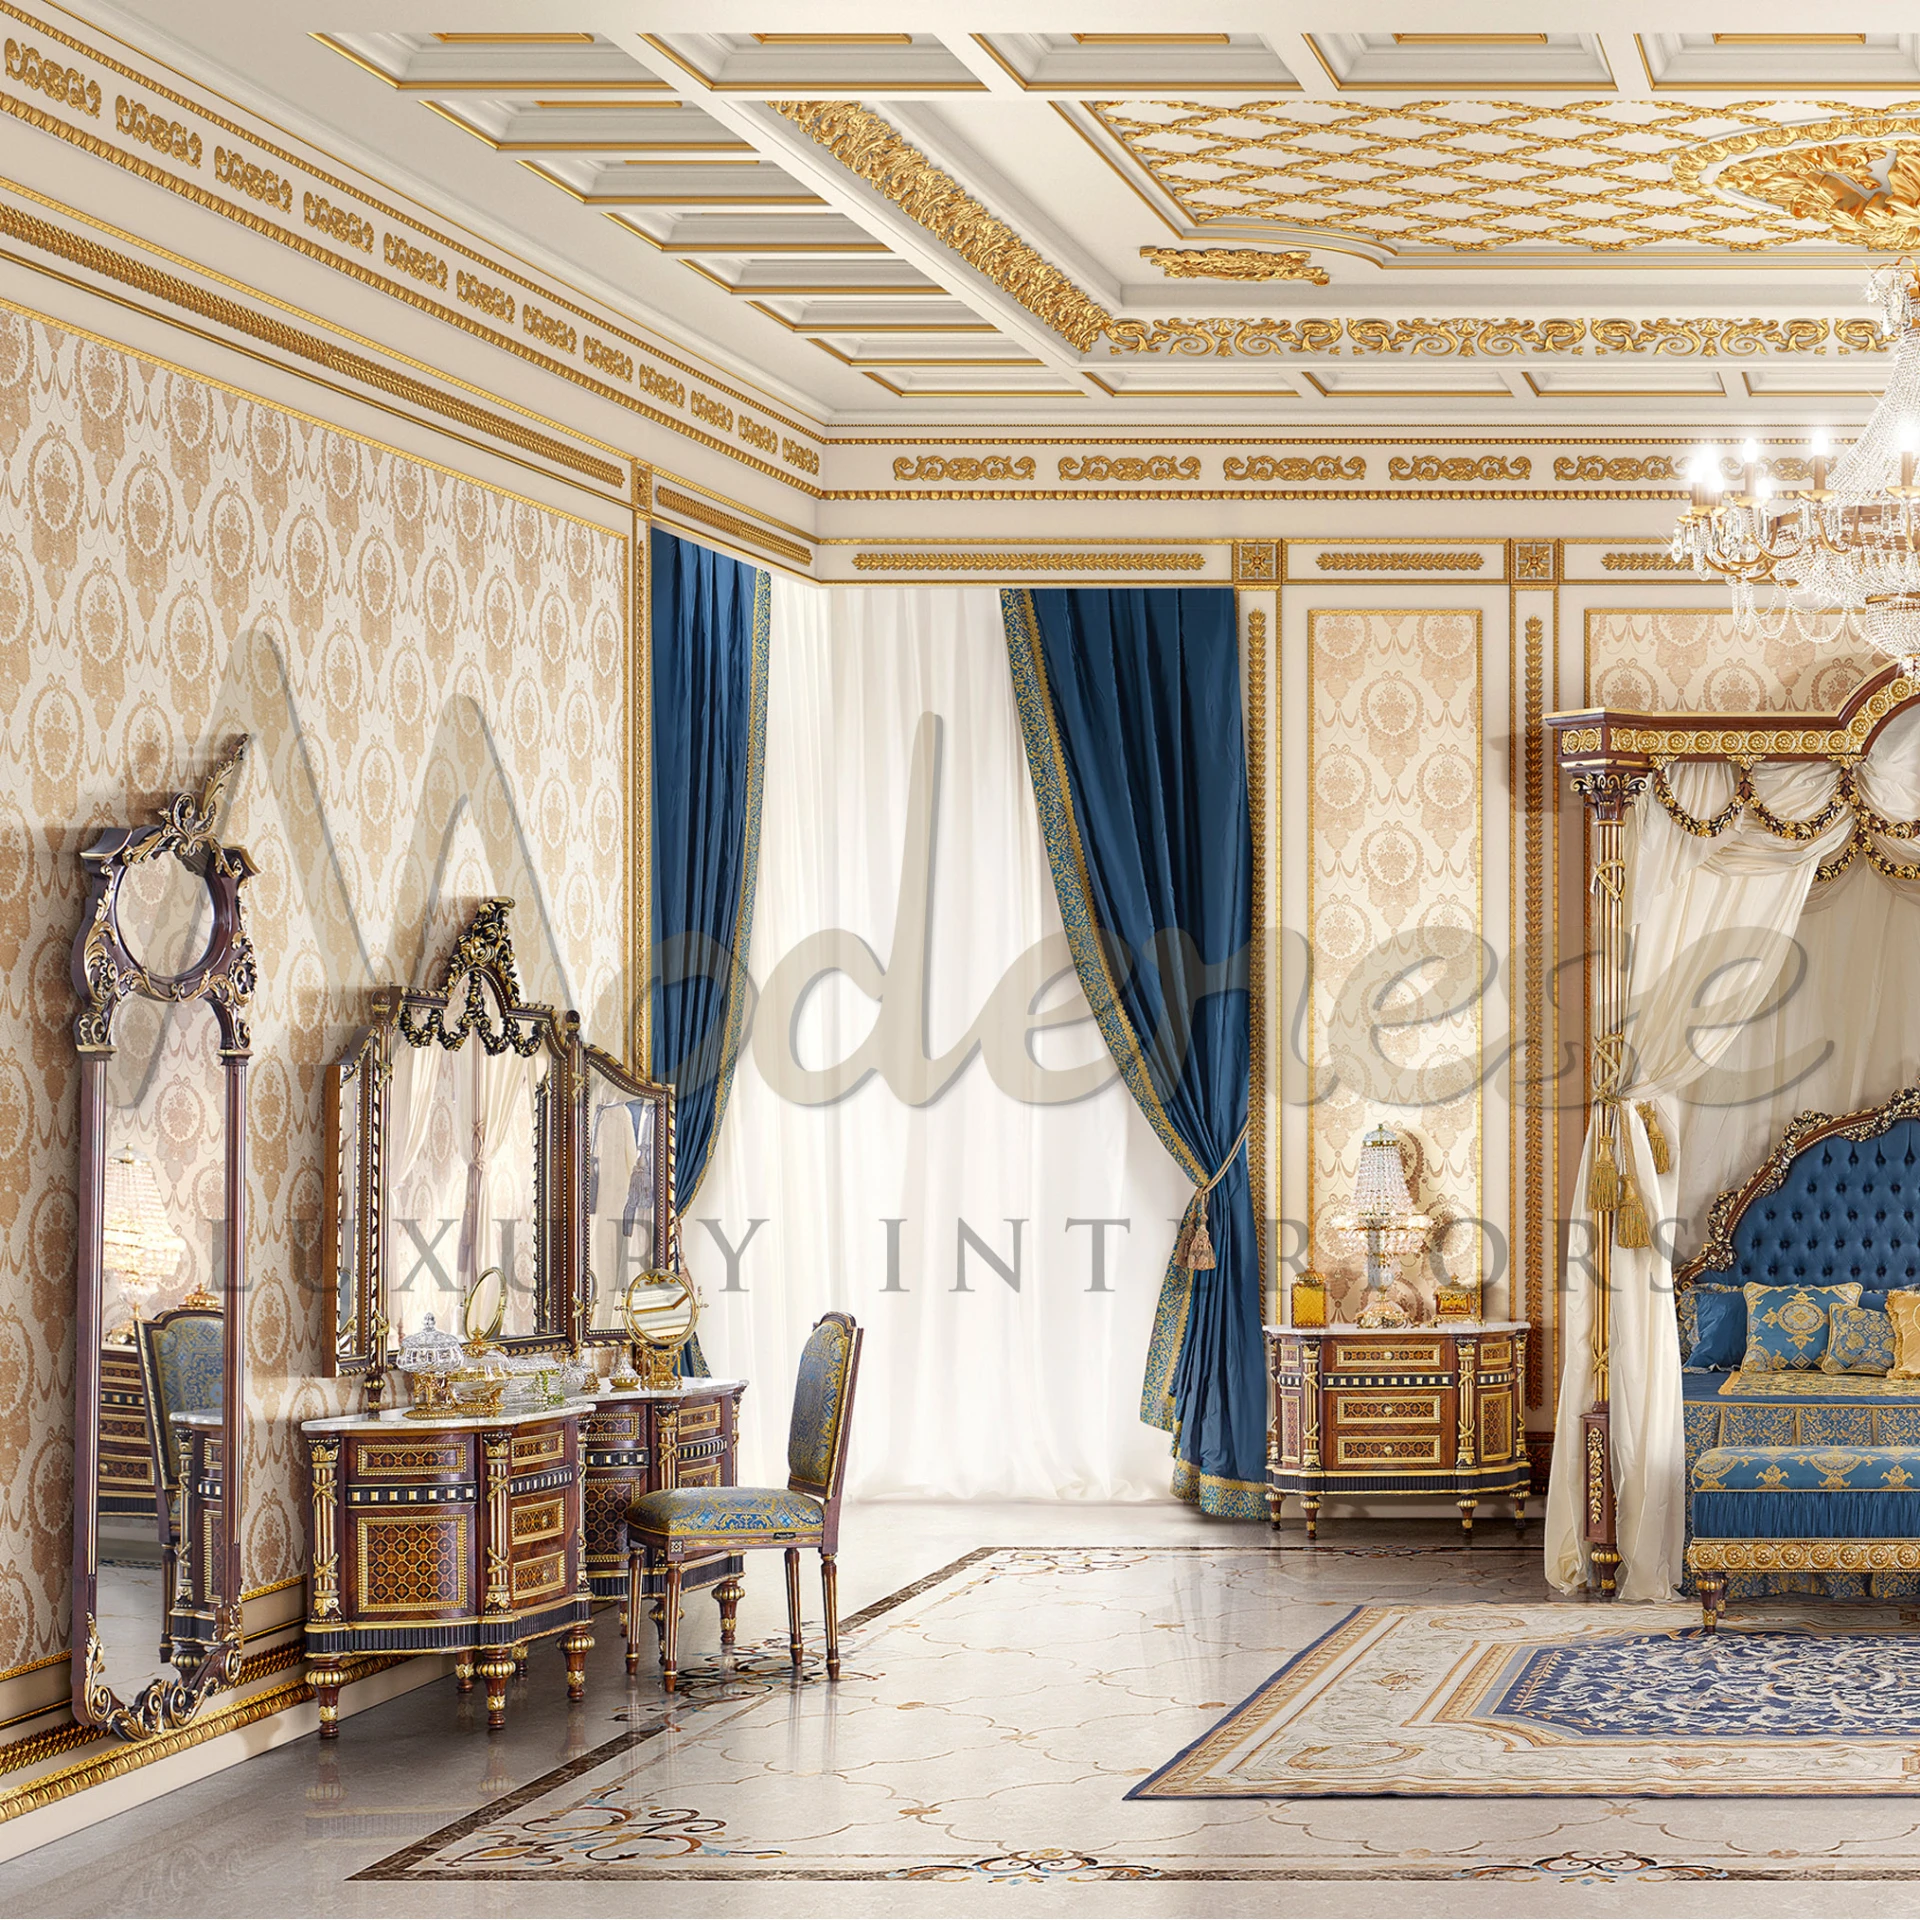 Lavish dining room with intricate designs and luxurious furnishings